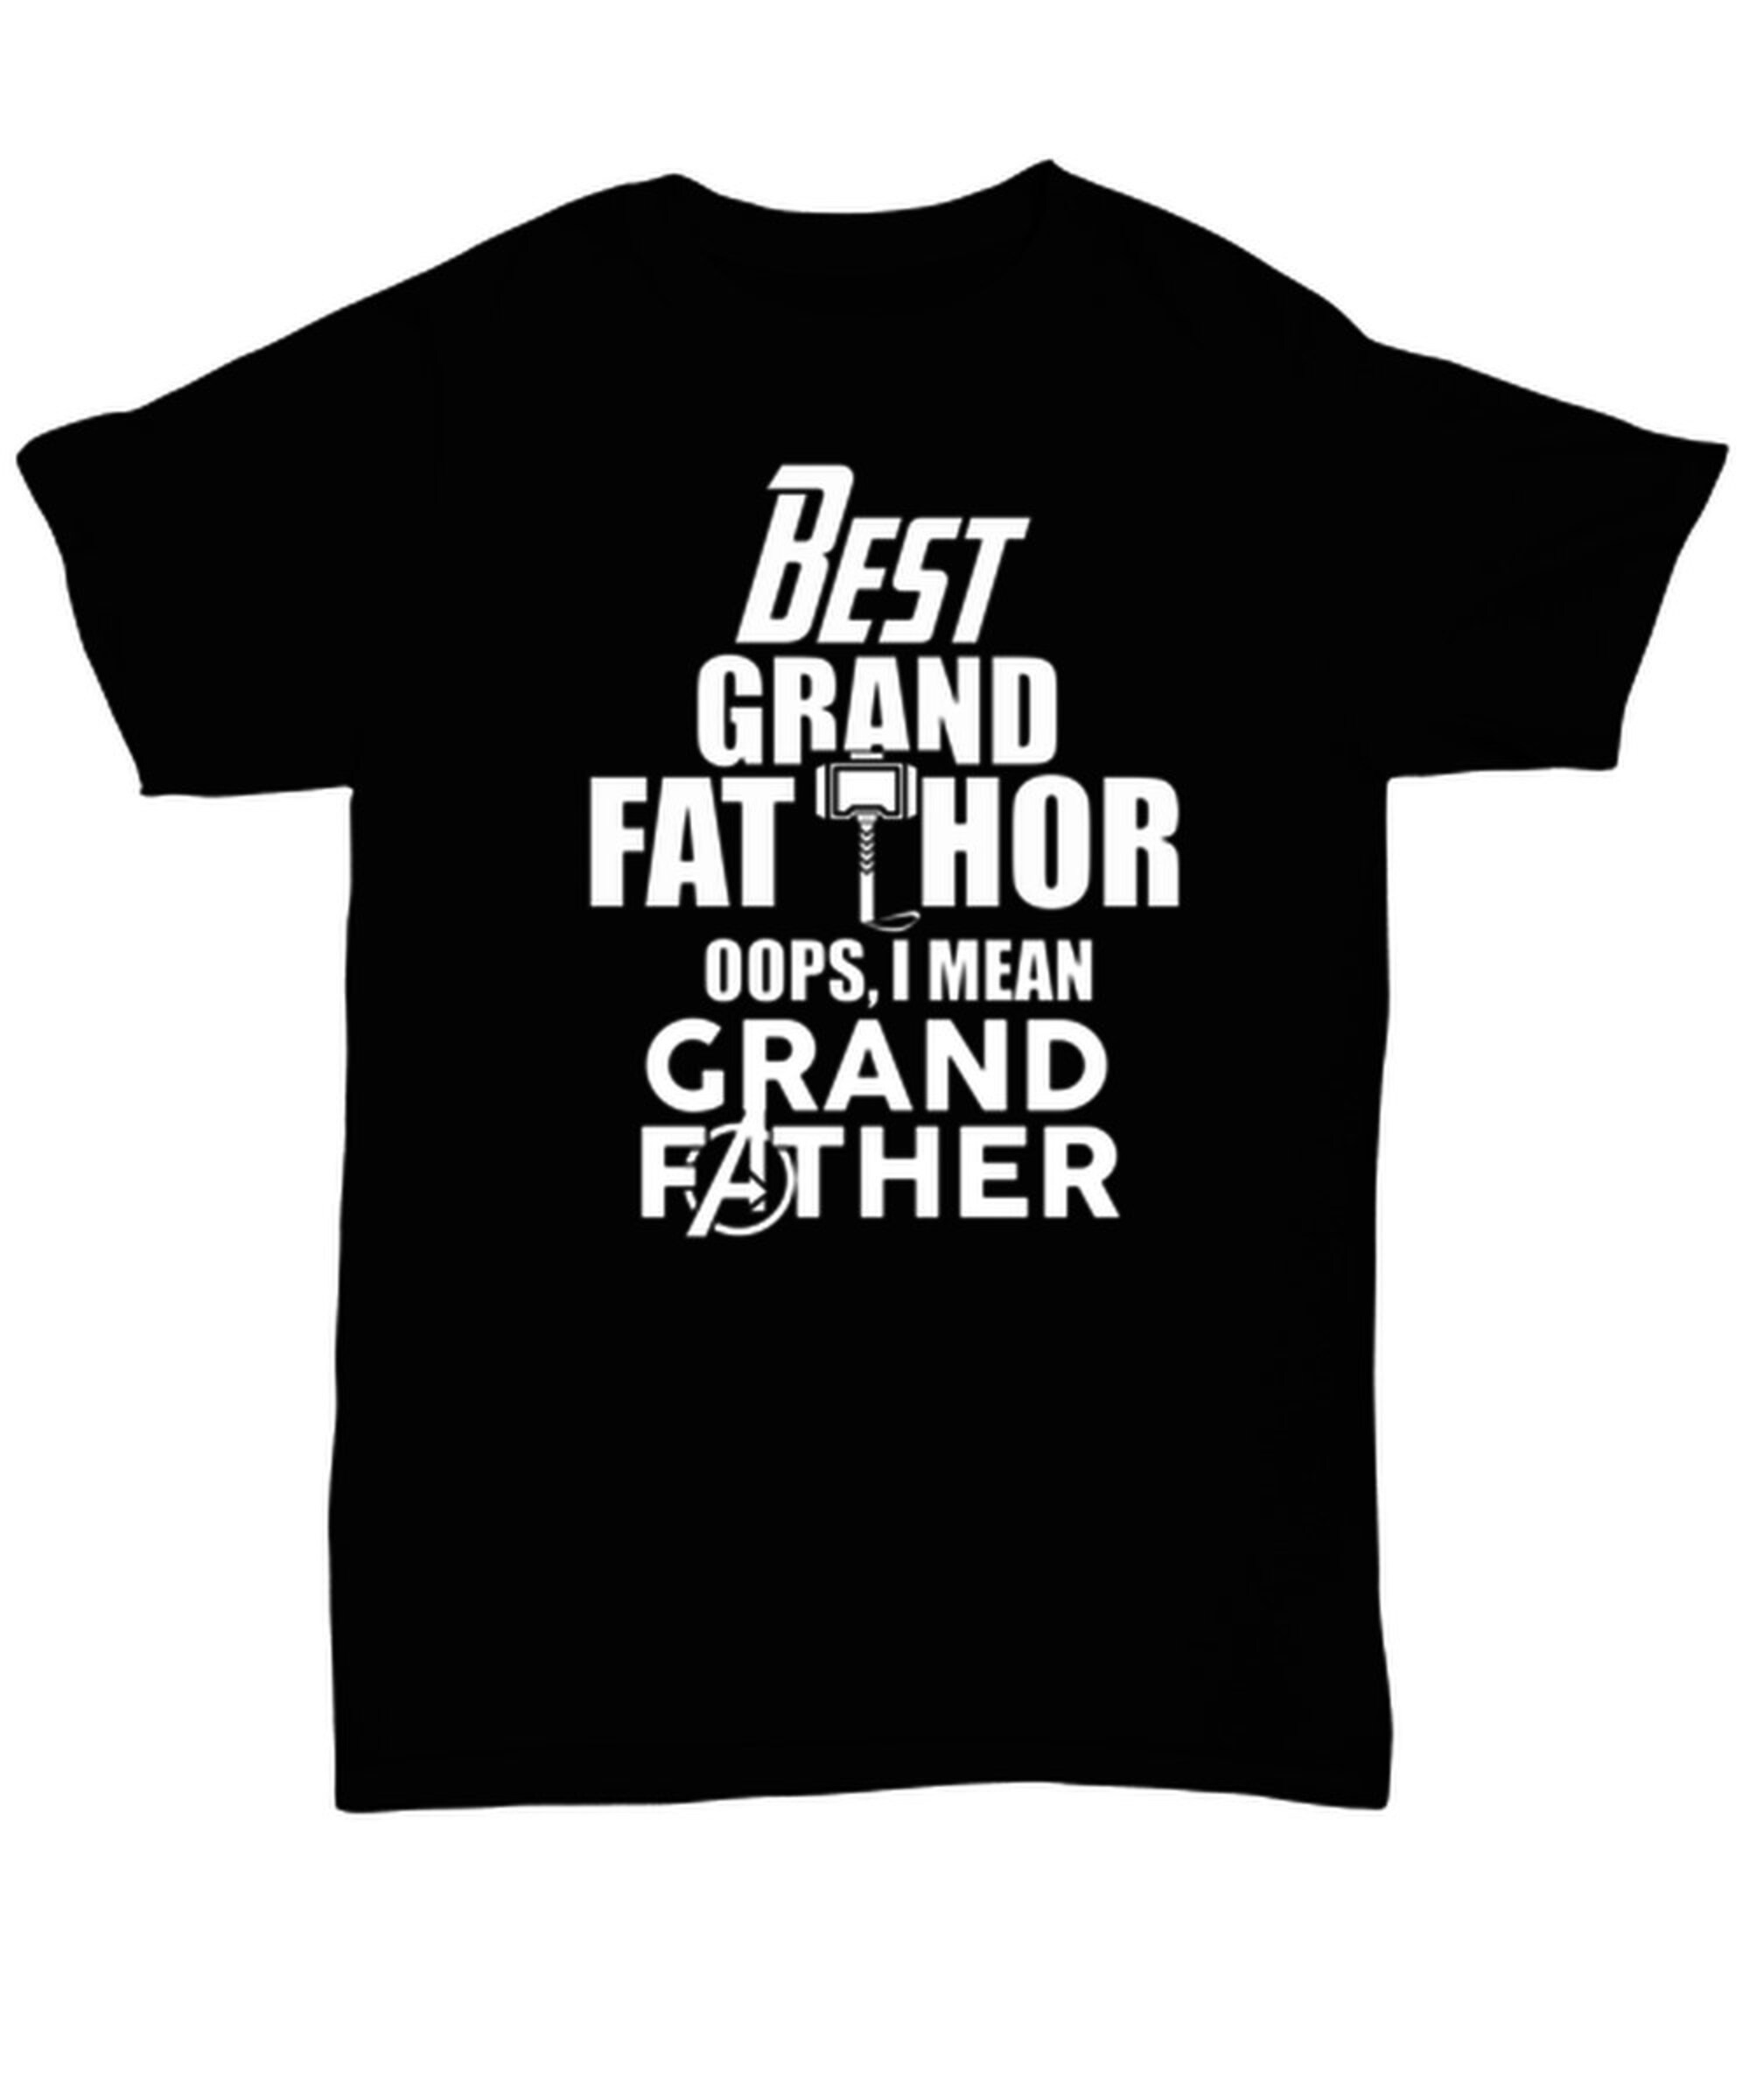 Funny Grand Fat Thor Shirt. Oops I Mean Grandfather Shirt.  Grand Daddy T-shirt